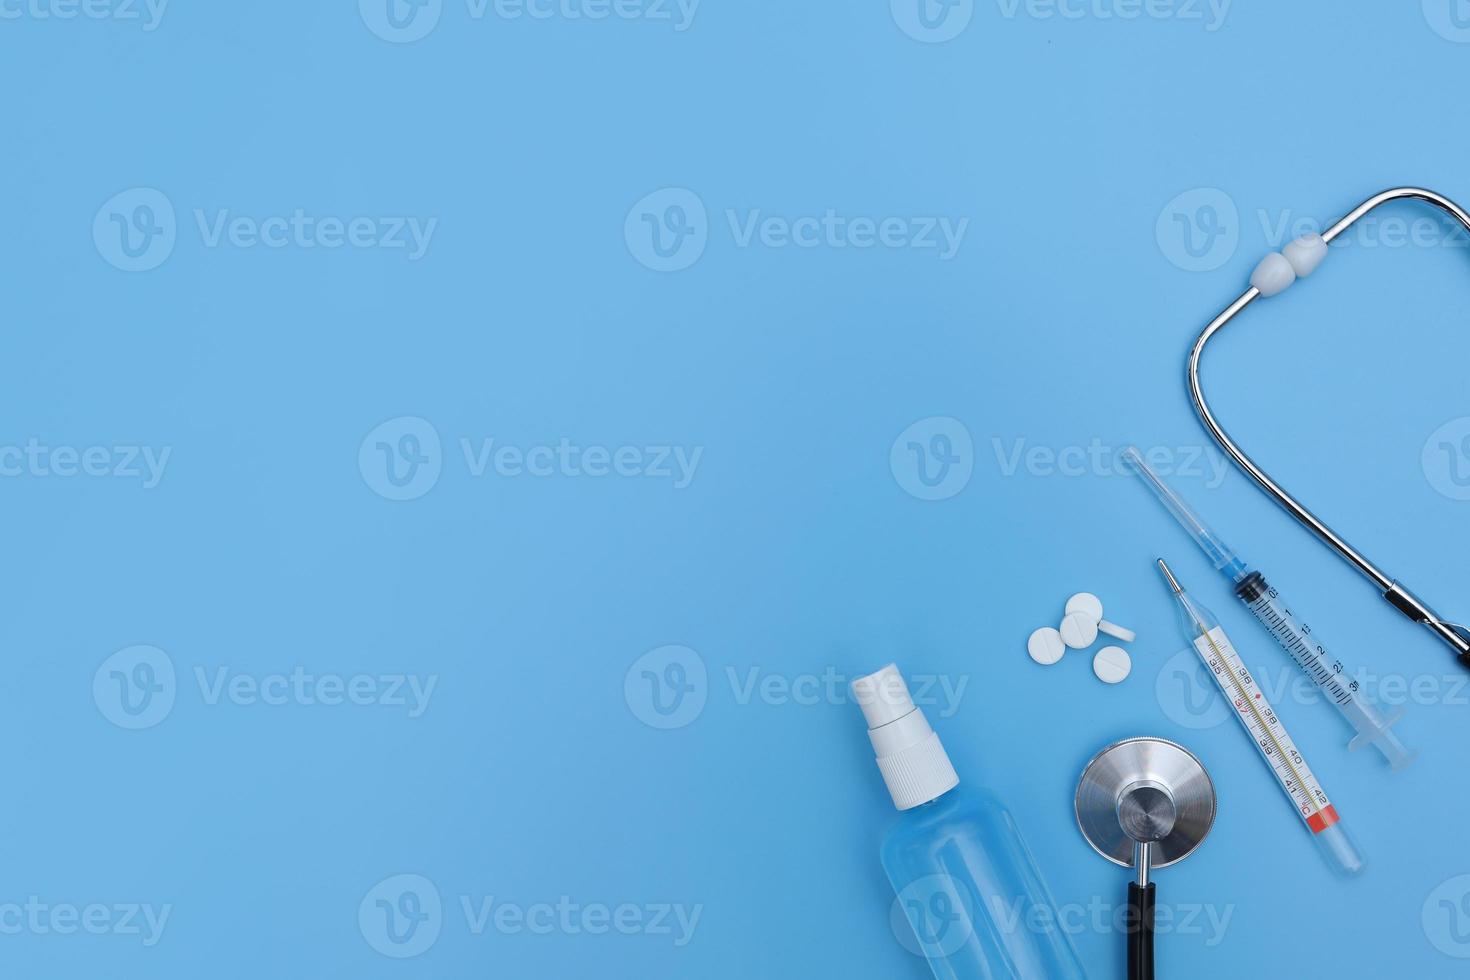 Thermometer, sanitizer, ampoule stethoscope and blister packed medicines over blue backdrop. Concept of healthcare, online shopping, high cost of medicines. expensive medicine. selective focus photo